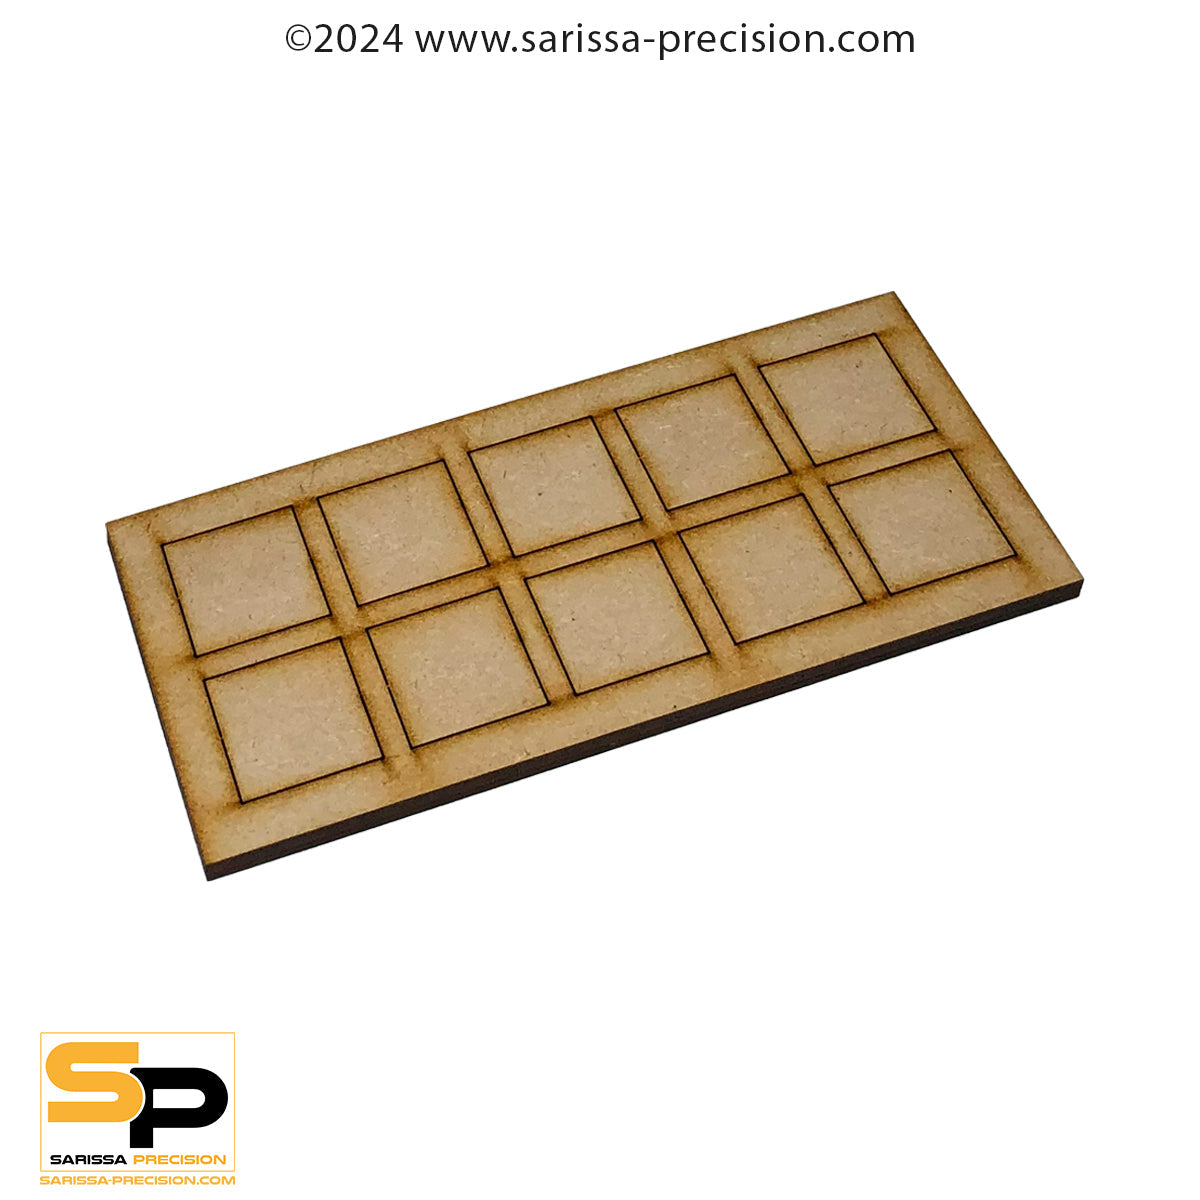 12 x 8 30x30mm Conversion Tray for 25x25mm bases